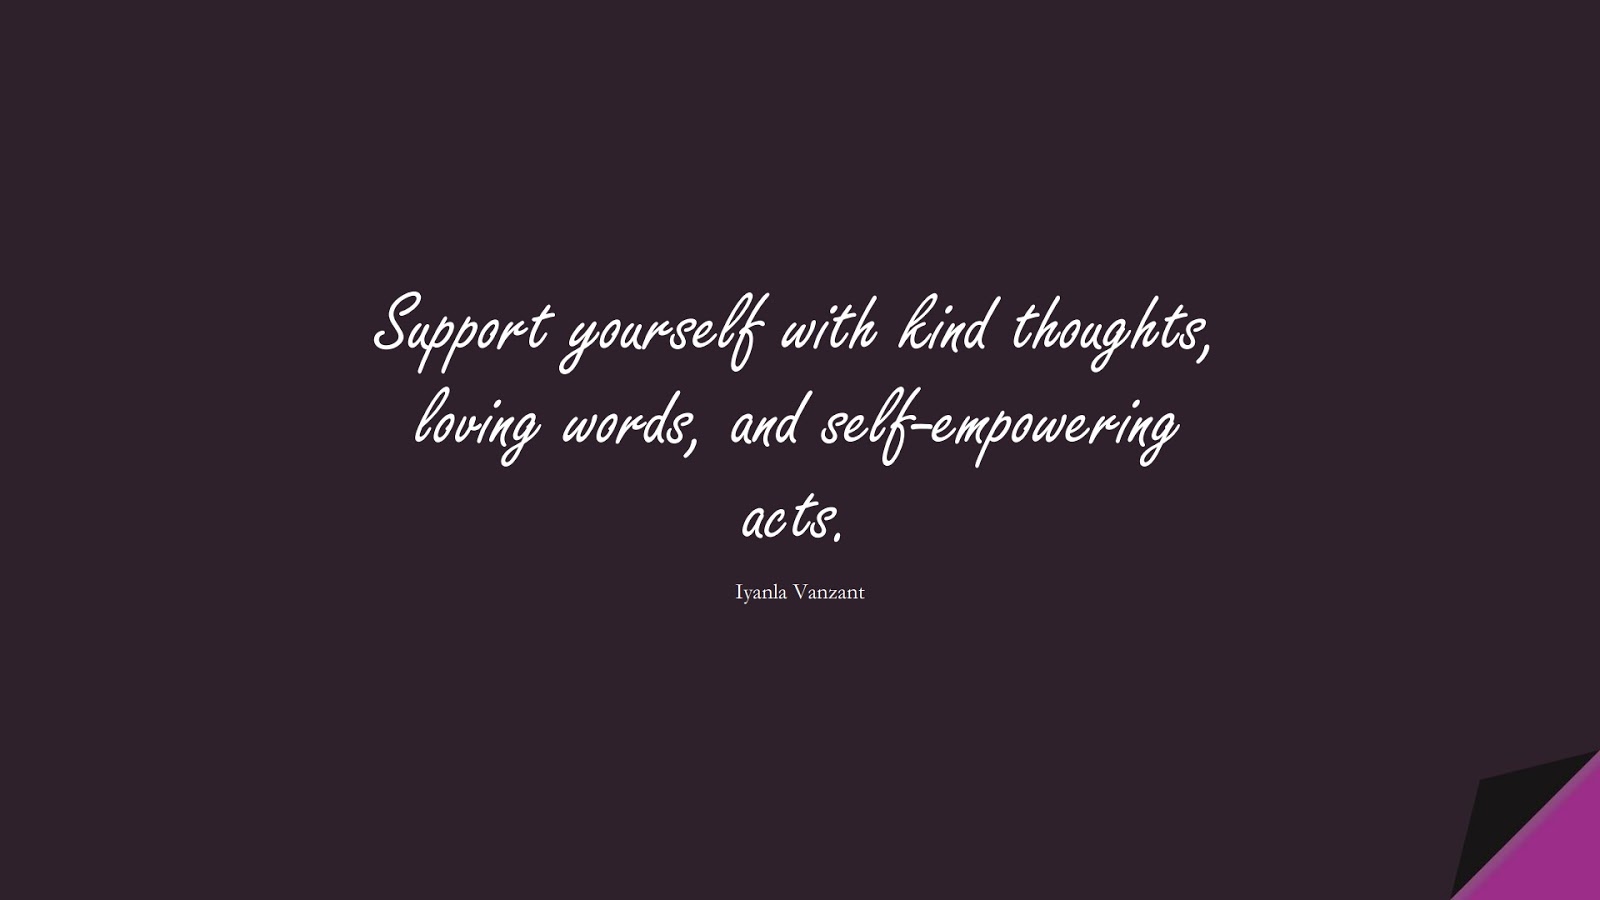 Support yourself with kind thoughts, loving words, and self-empowering acts. (Iyanla Vanzant);  #LoveYourselfQuotes